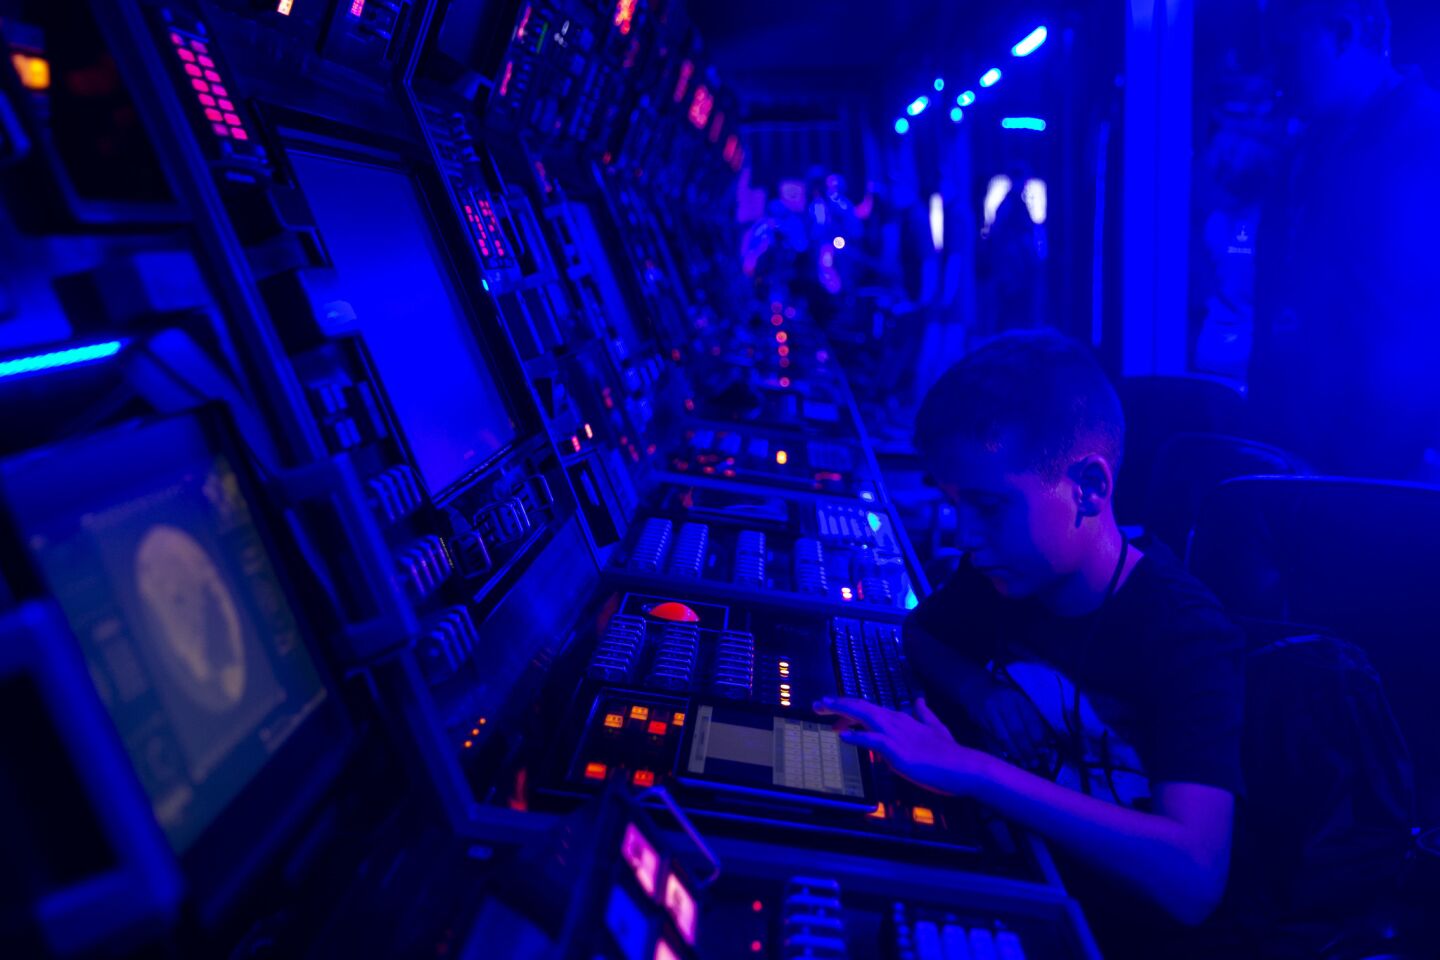 Austen Bue, 11, from San Diego sends a text message to space, at the Hsitory Channel's "Project Blue Book" activation site.